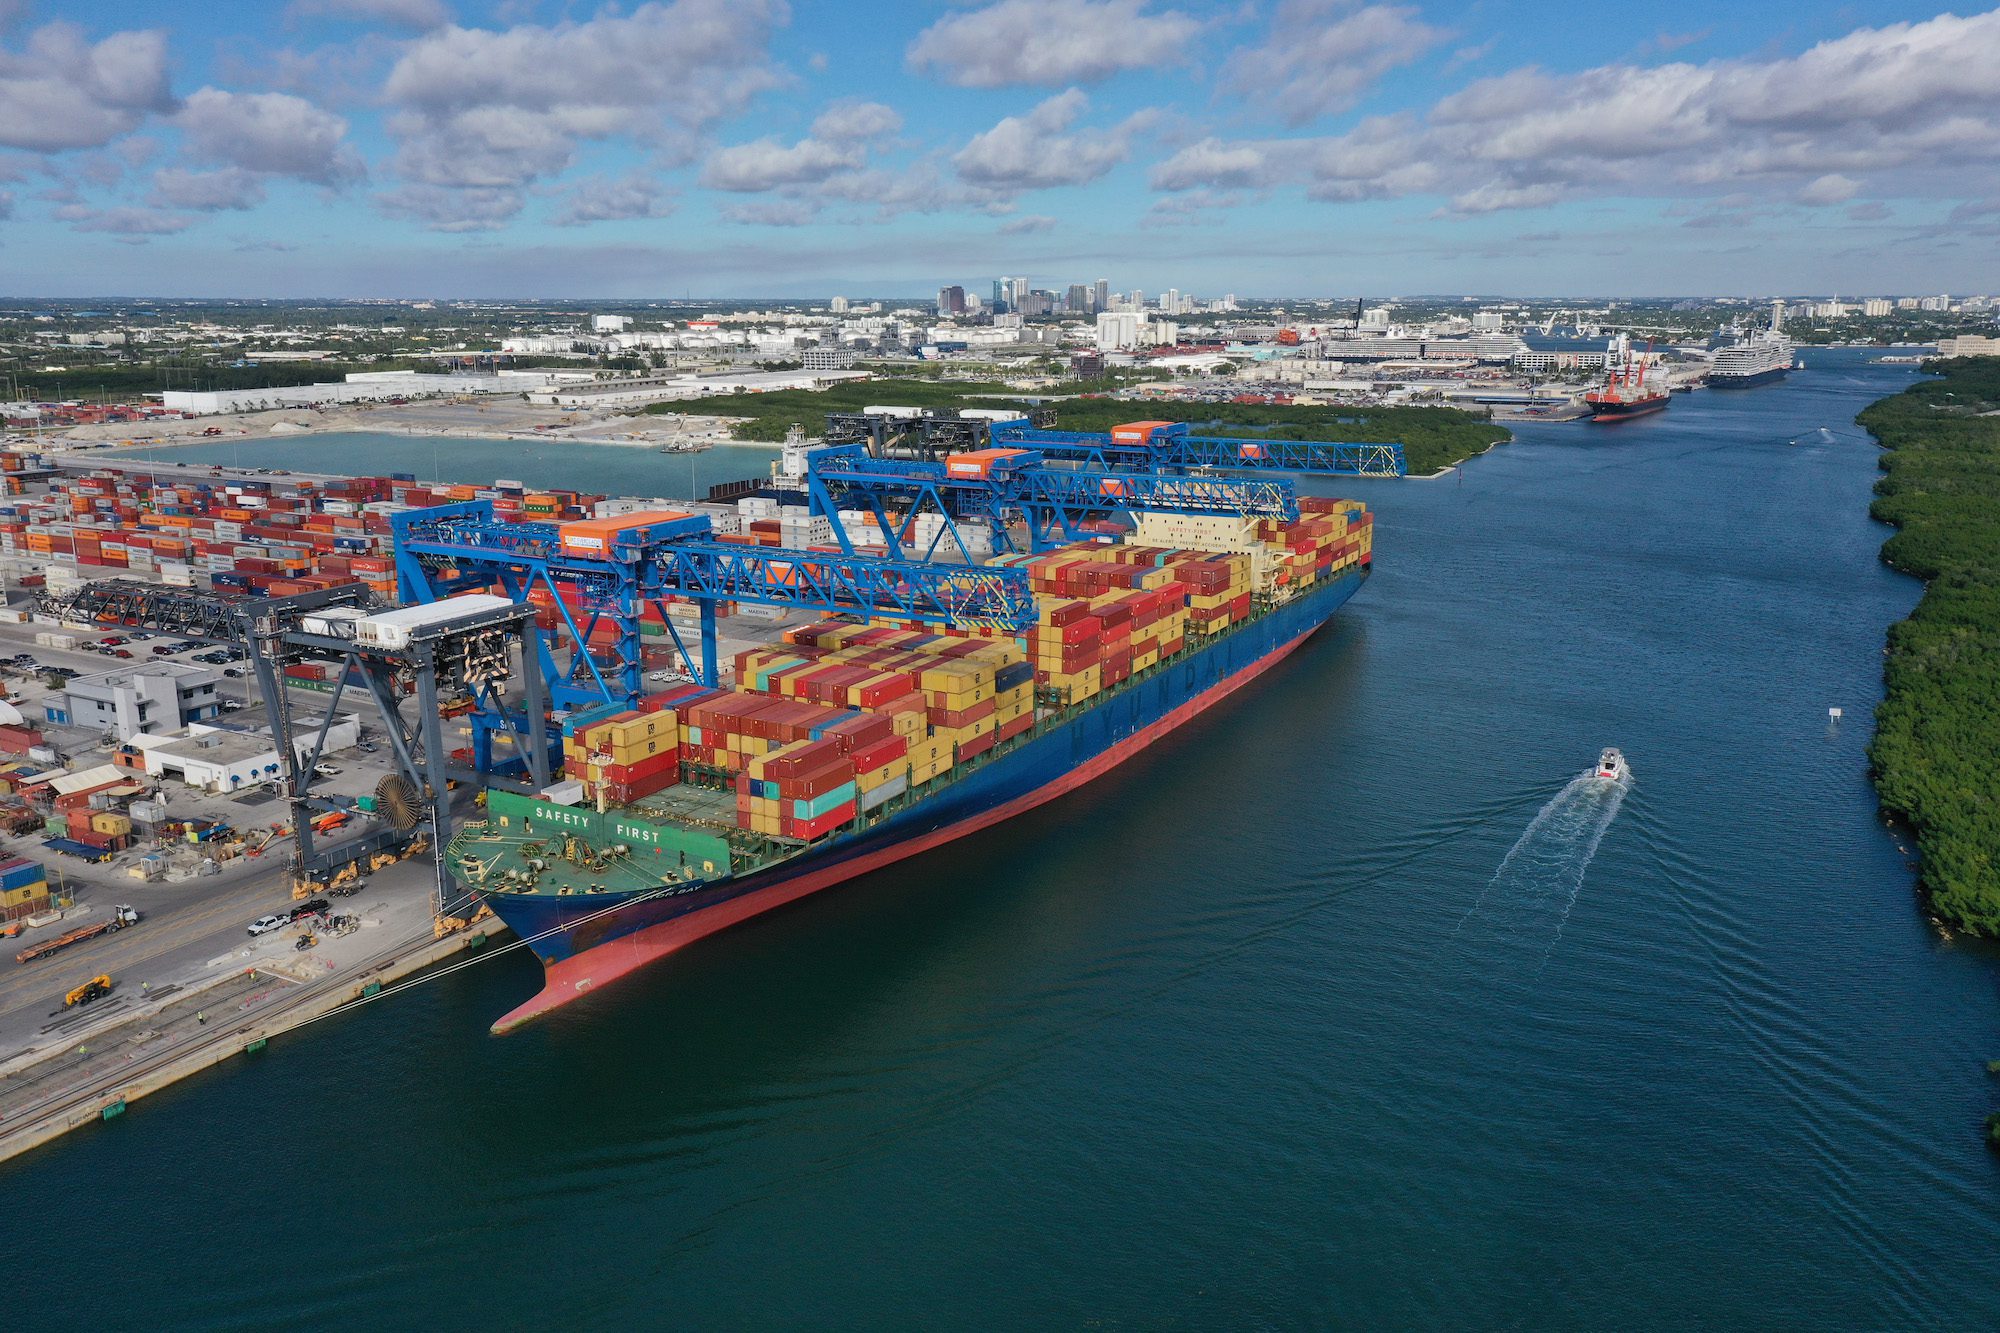 Florida Ports: A Sunny View of The Container Trades